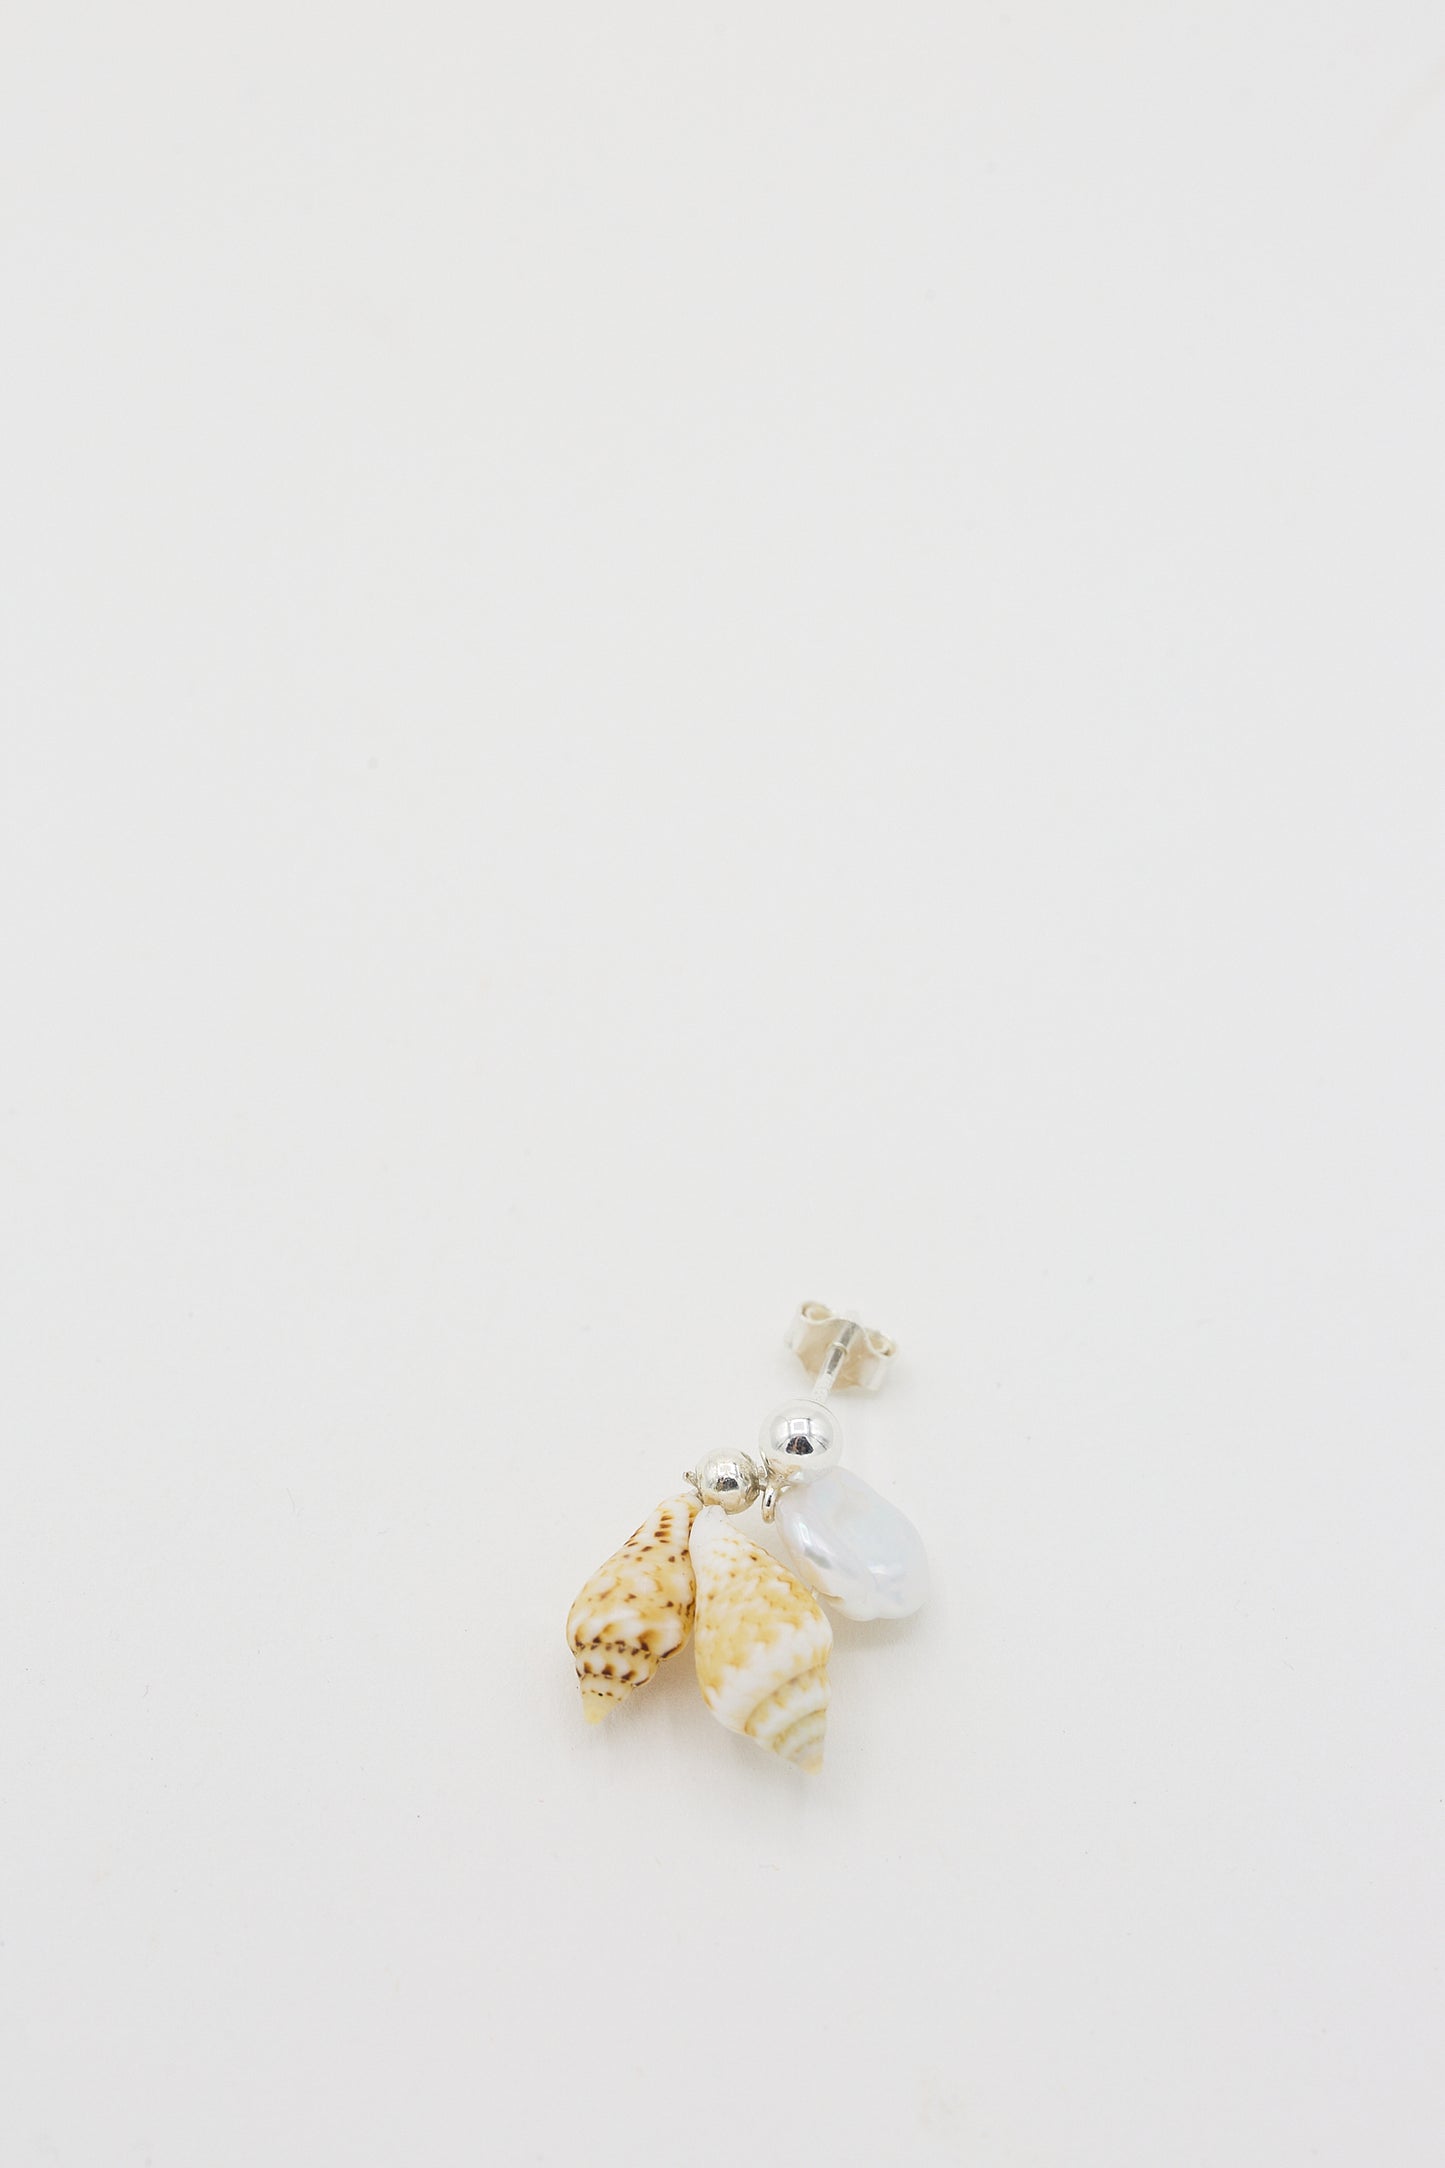 A single Santangelo Double Shell Bebecita earrings with keshi pearl accents on a white background.